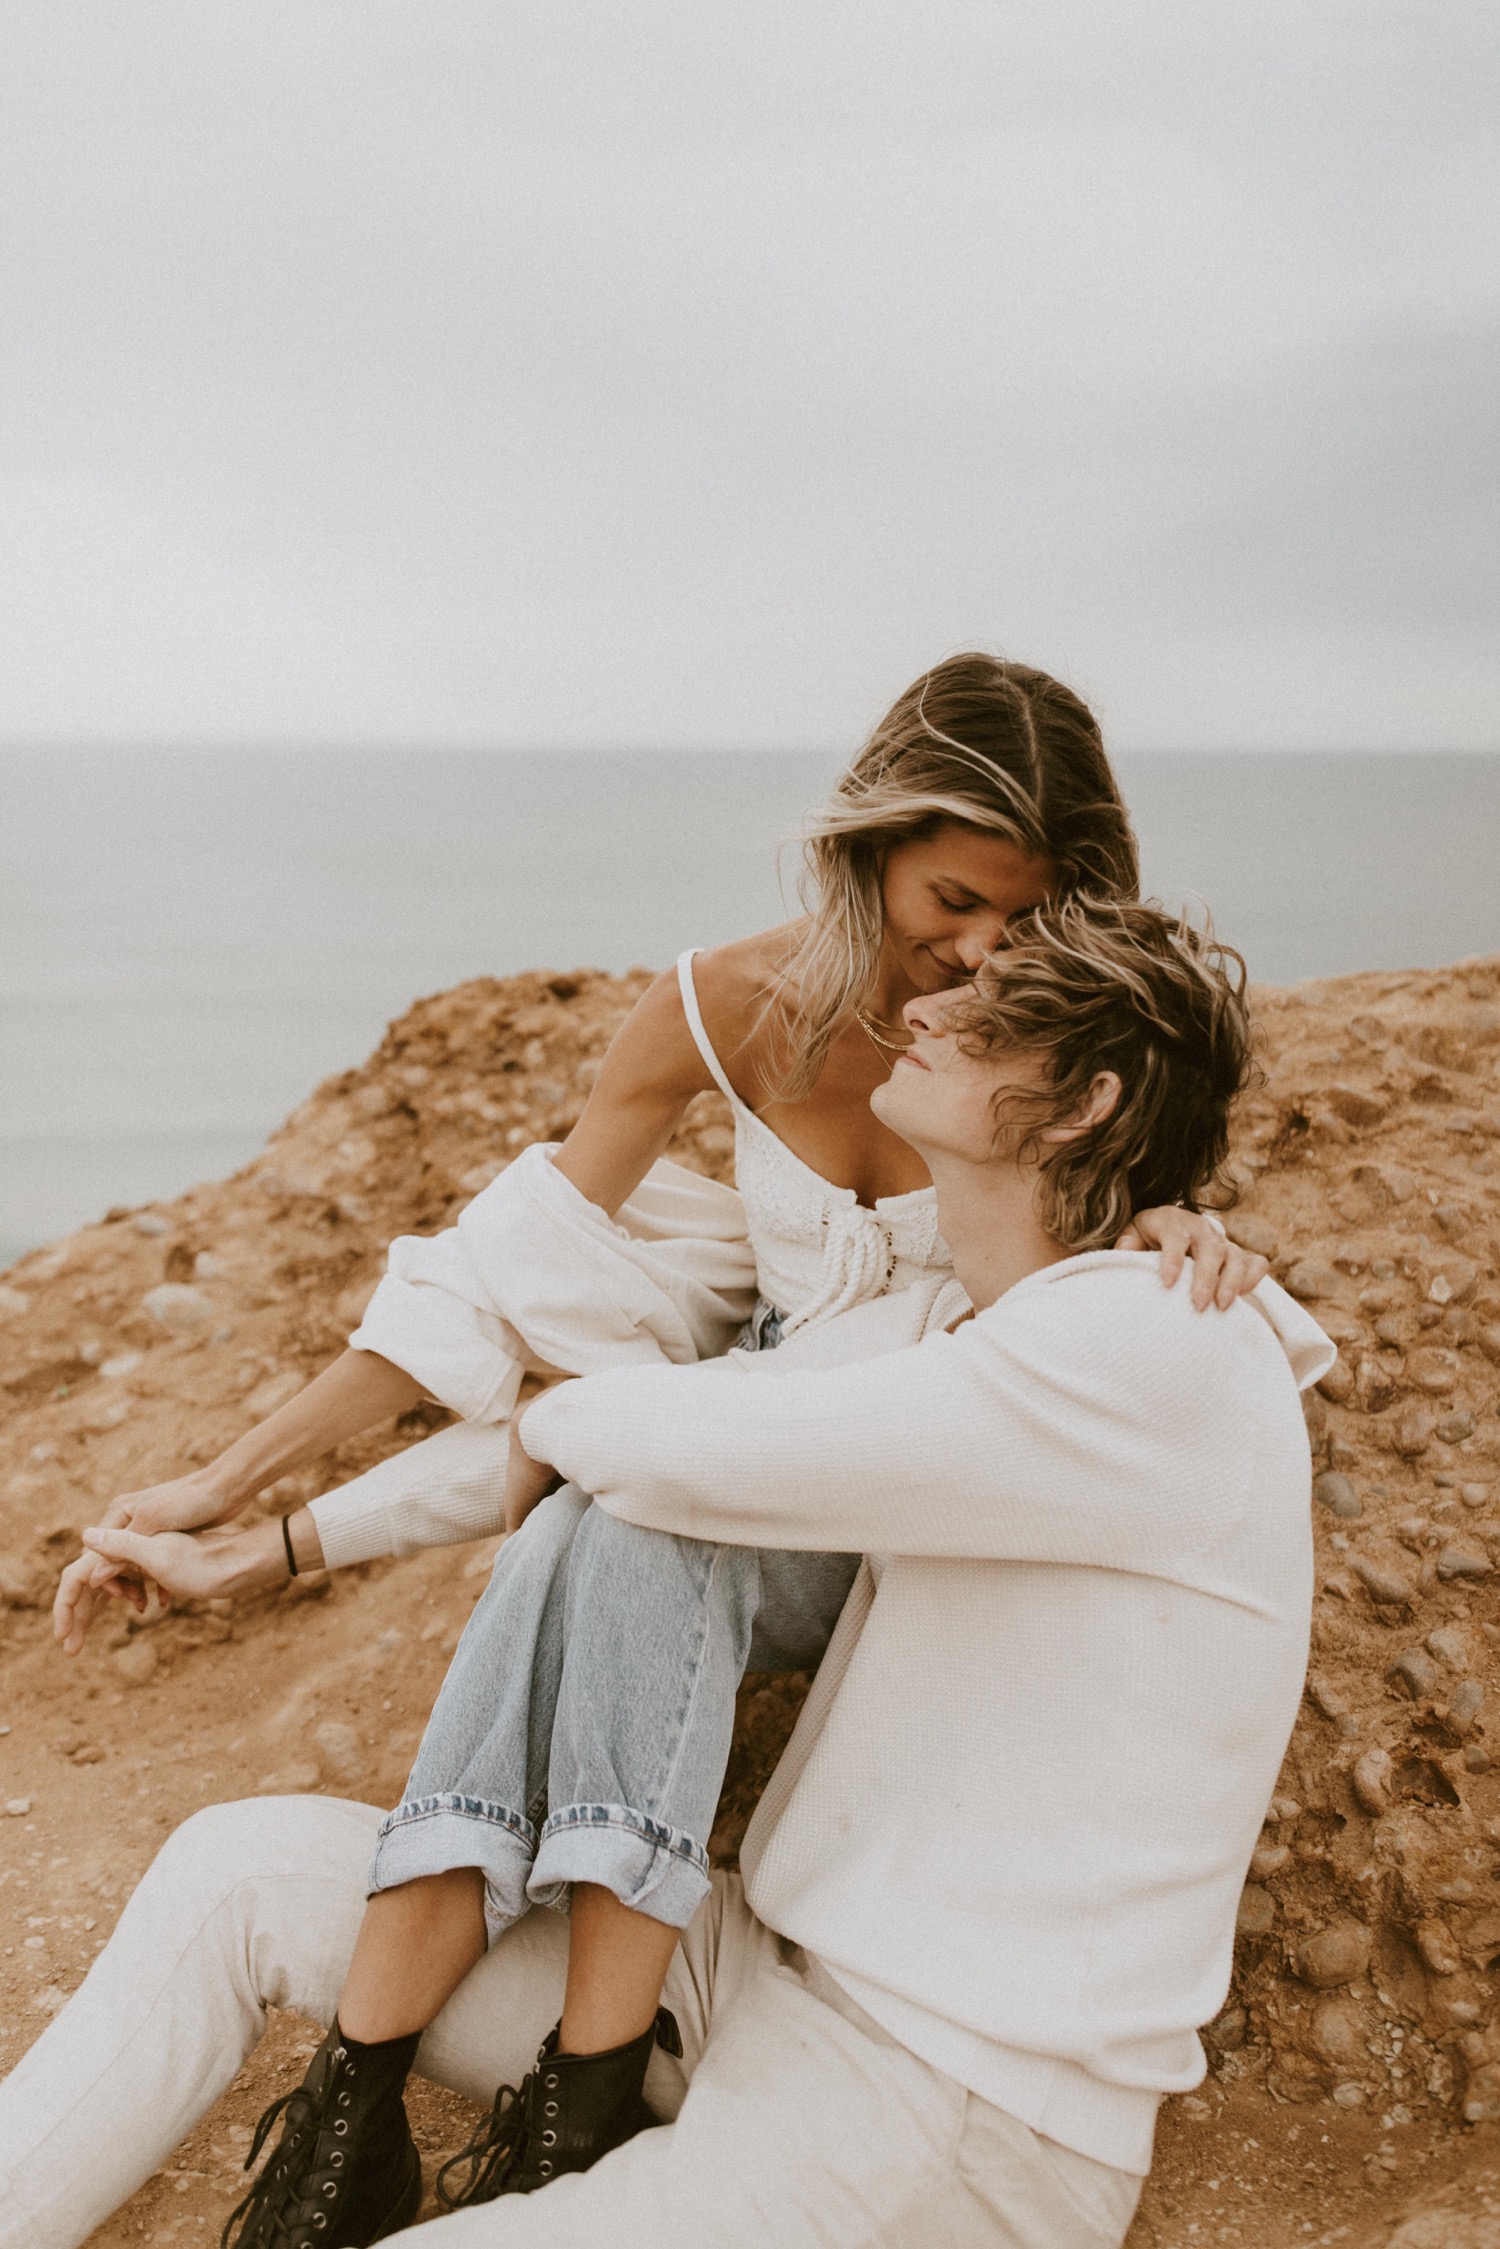 Best Couples Photography Poses 2020 Ideas - 7SEM PAD | Couples beach  photography, Couple photography poses, Engagement pictures poses